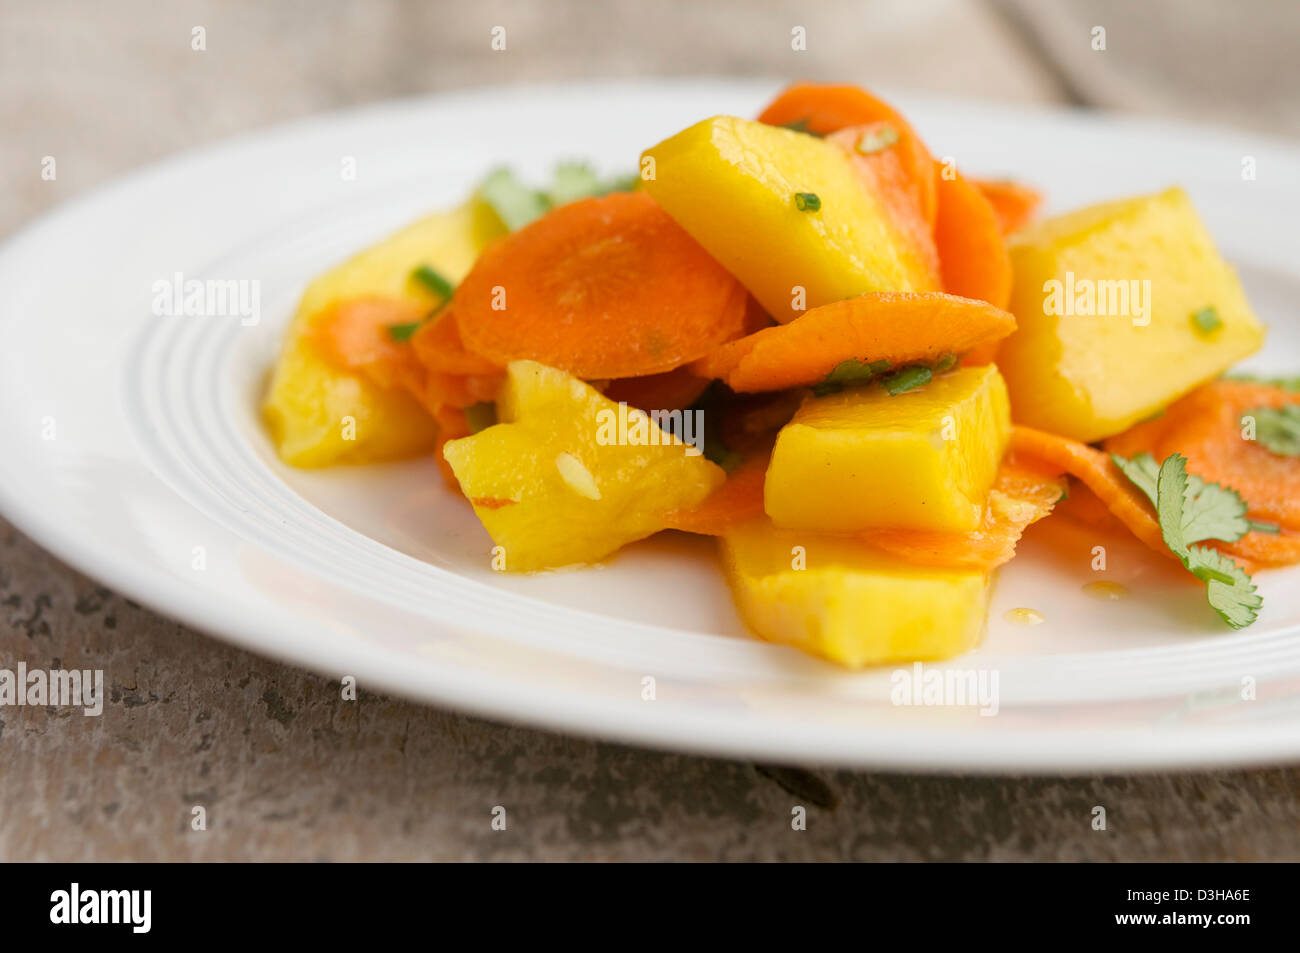 Plate with a fresh carrot and mango salad. Stock Photo